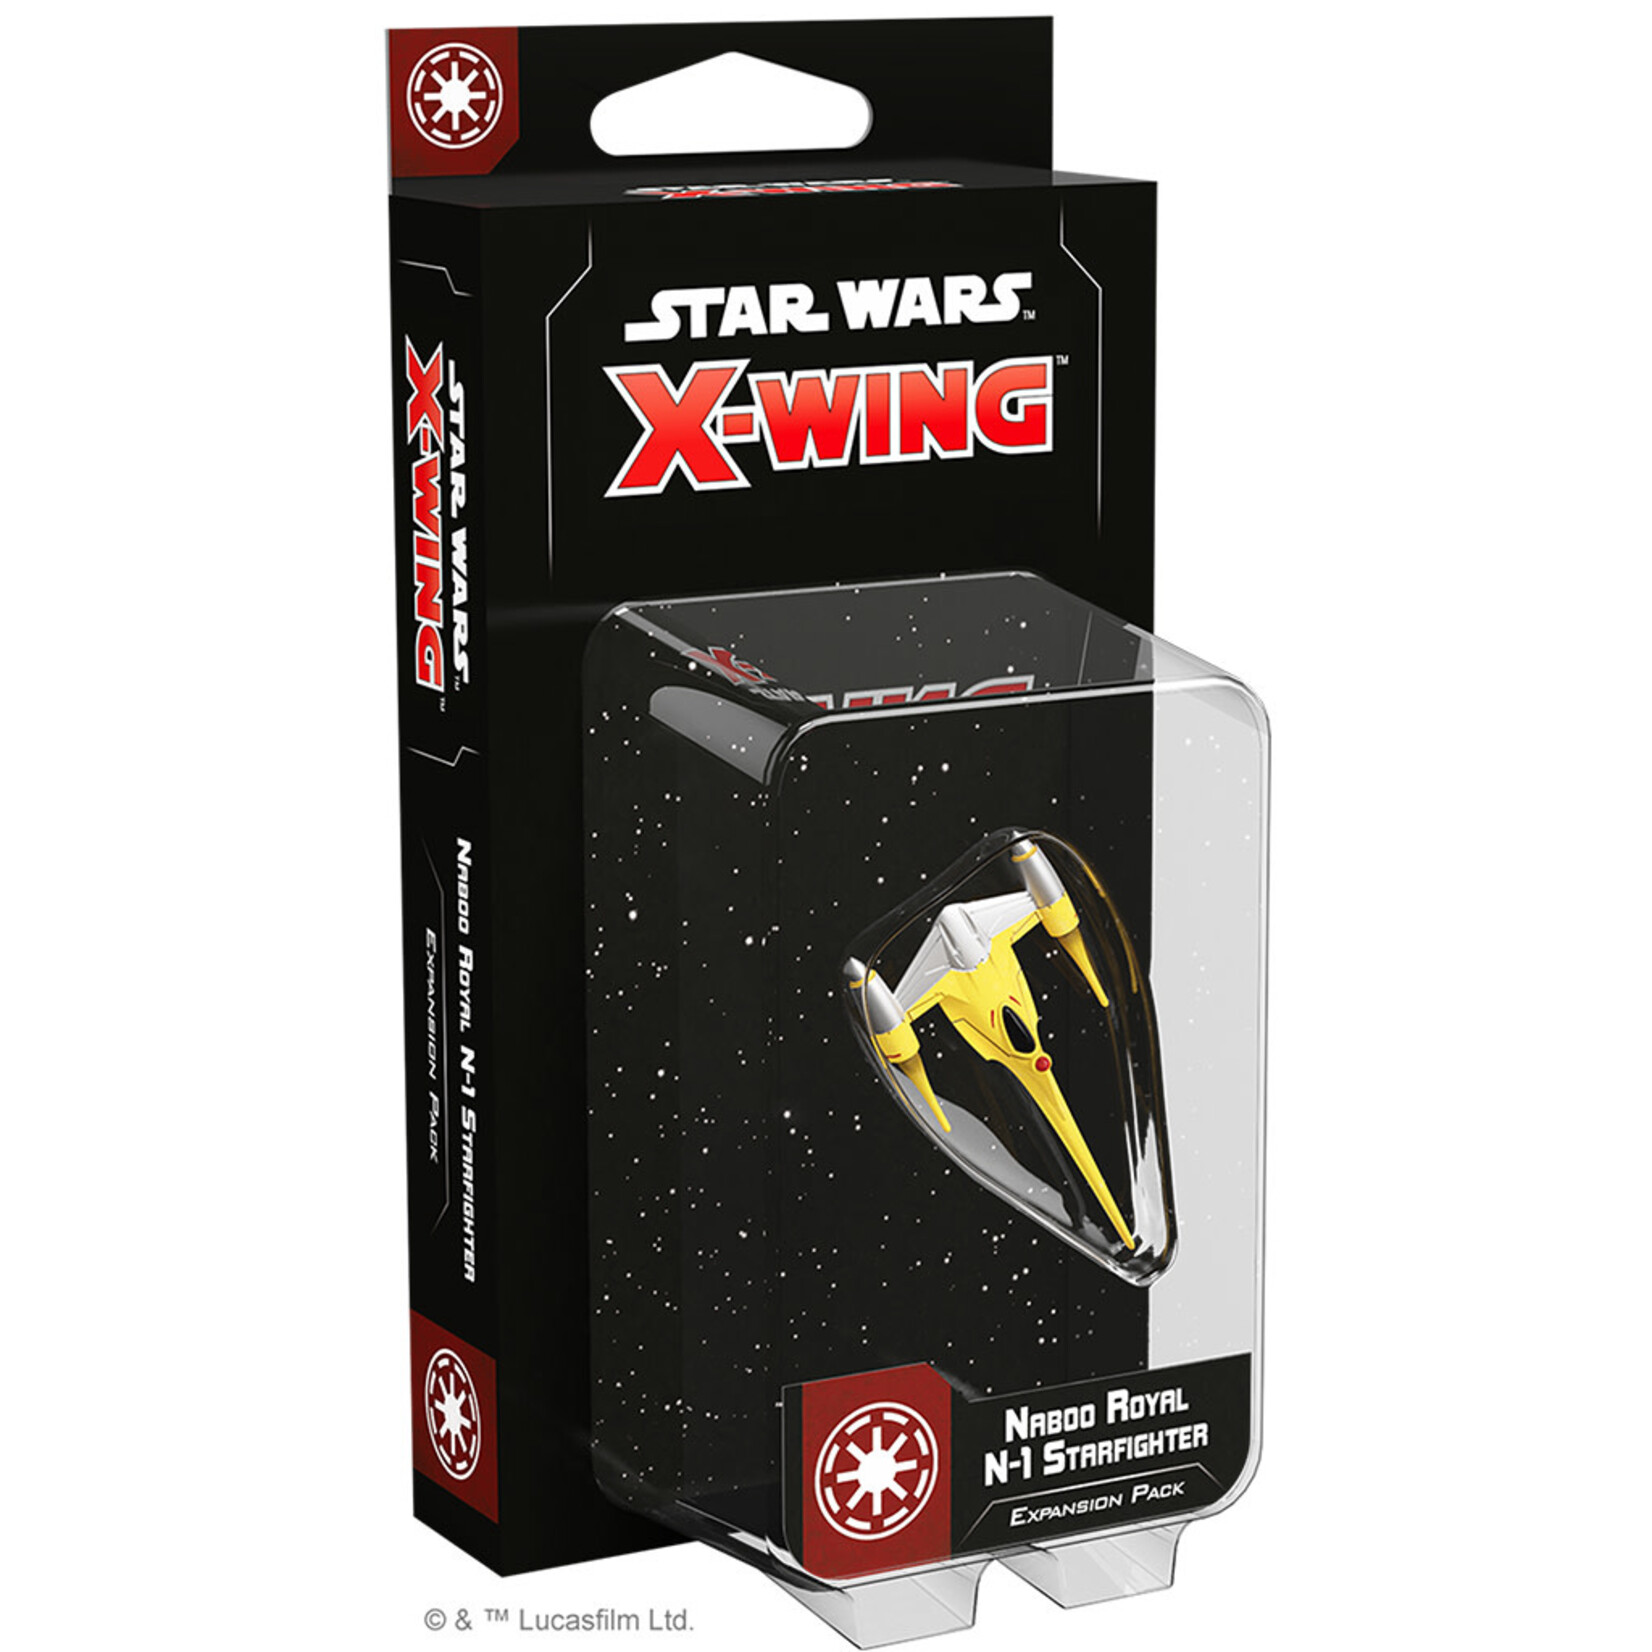 Fantasy Flight Games Star Wars X-Wing 2nd Ed: A/SF-01 B-Wing Expansion Pack